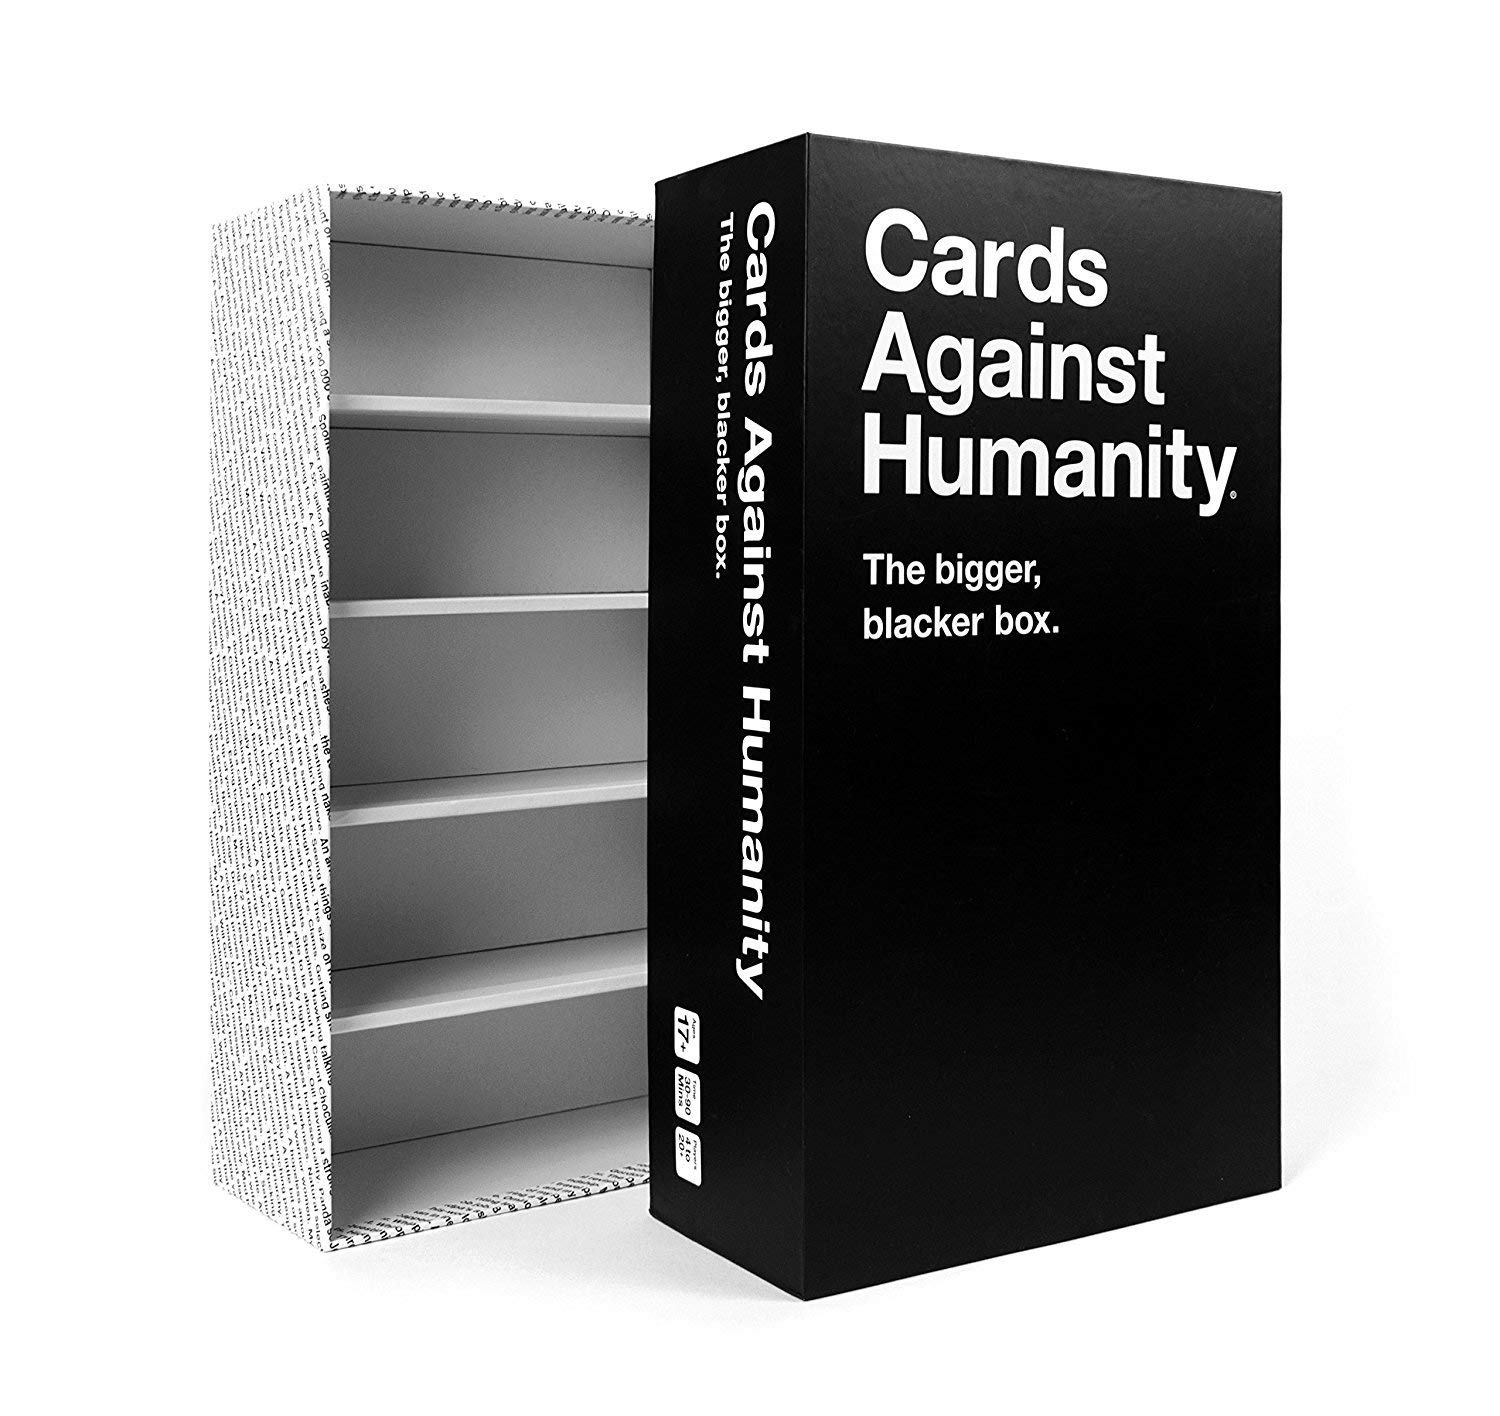 cards-against-humanity-the-bigger-blacker-box-cards-against-humanity